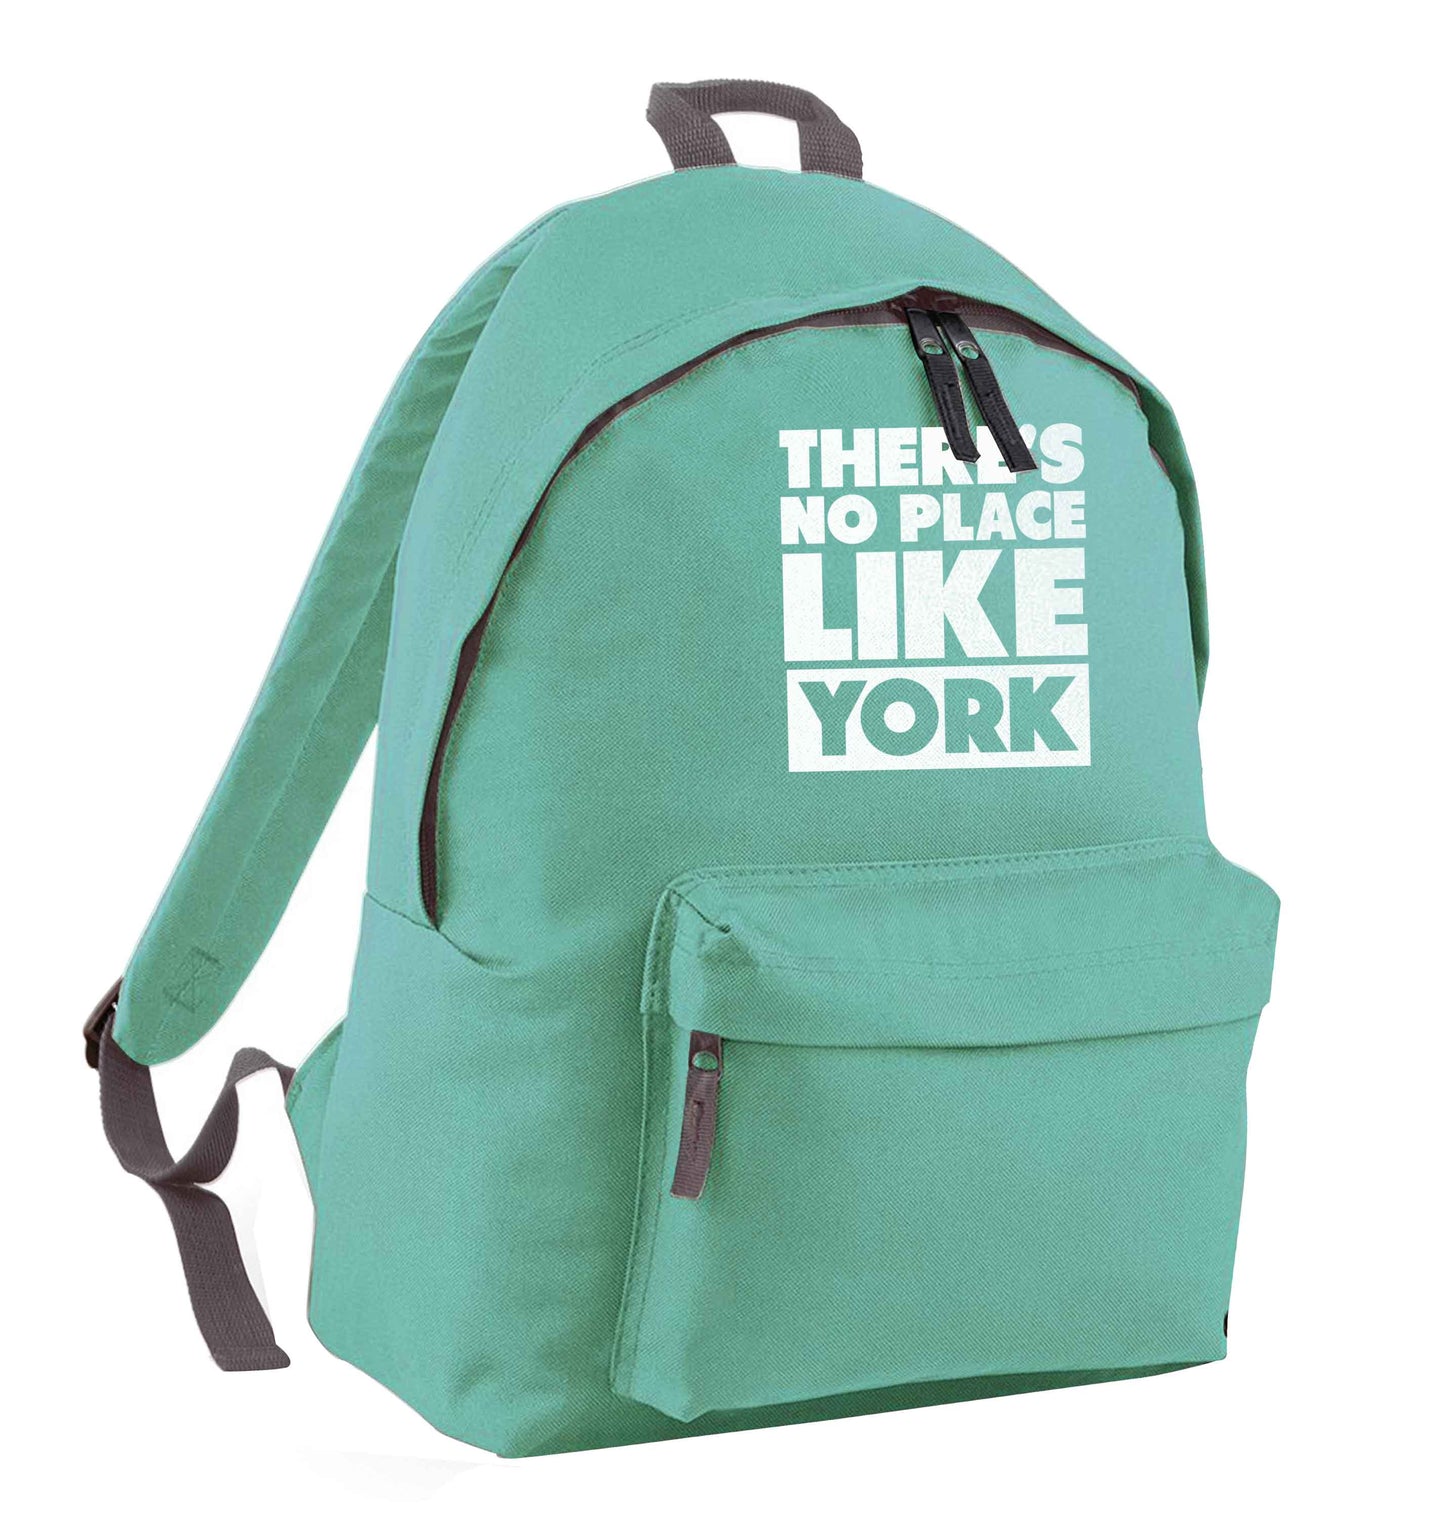 There's no place like york mint adults backpack